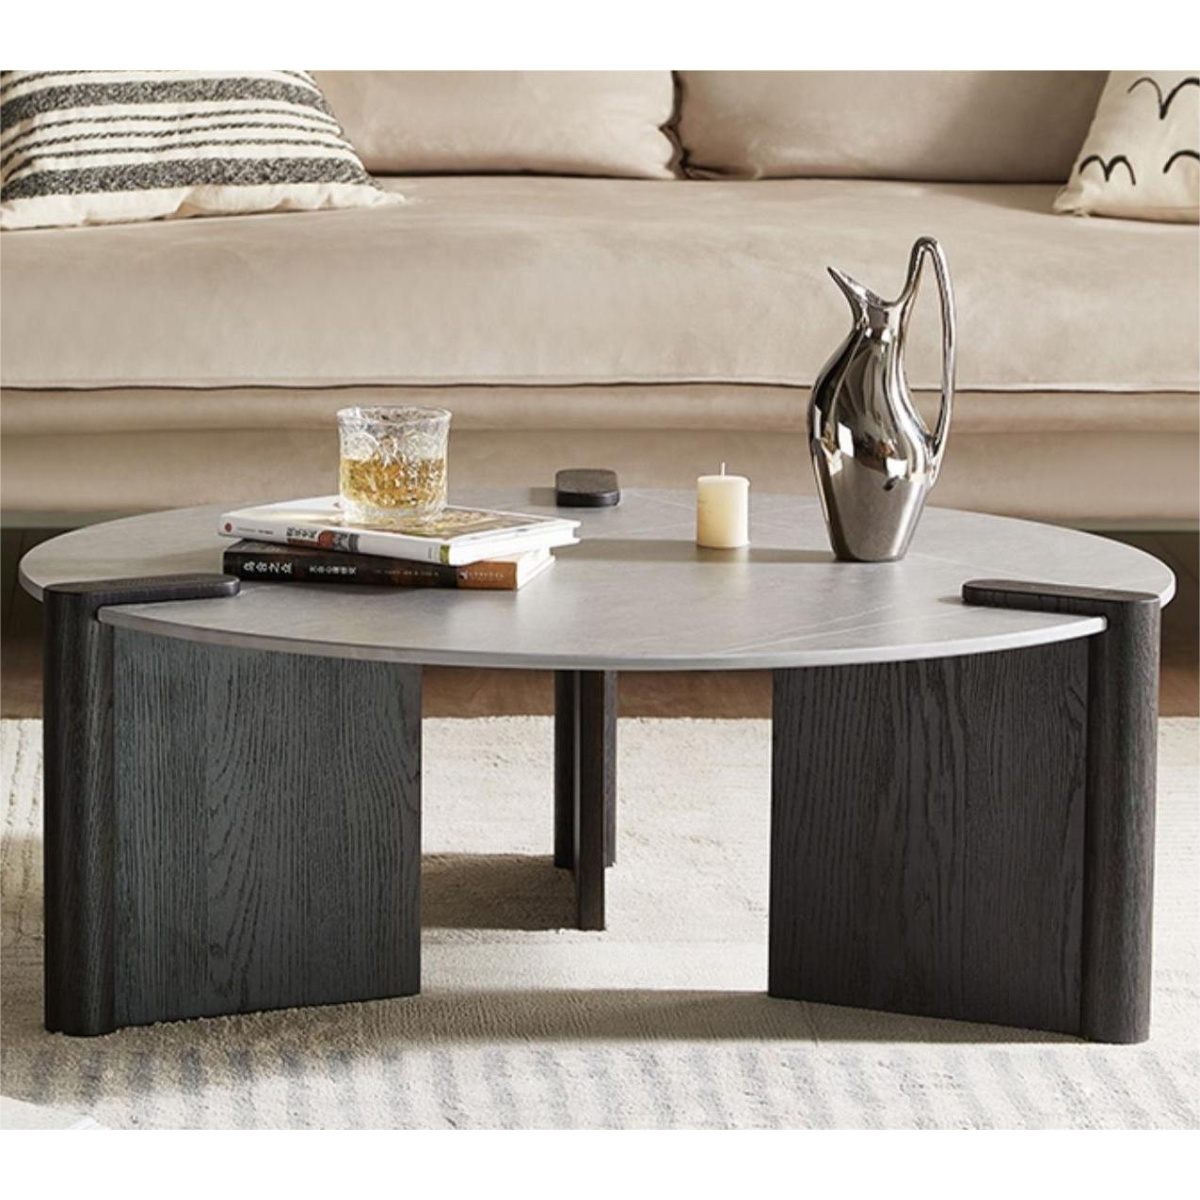 WoodFX woodefurniture coffee Grey Round Table with Slate Marble tabletop Wooden Frame